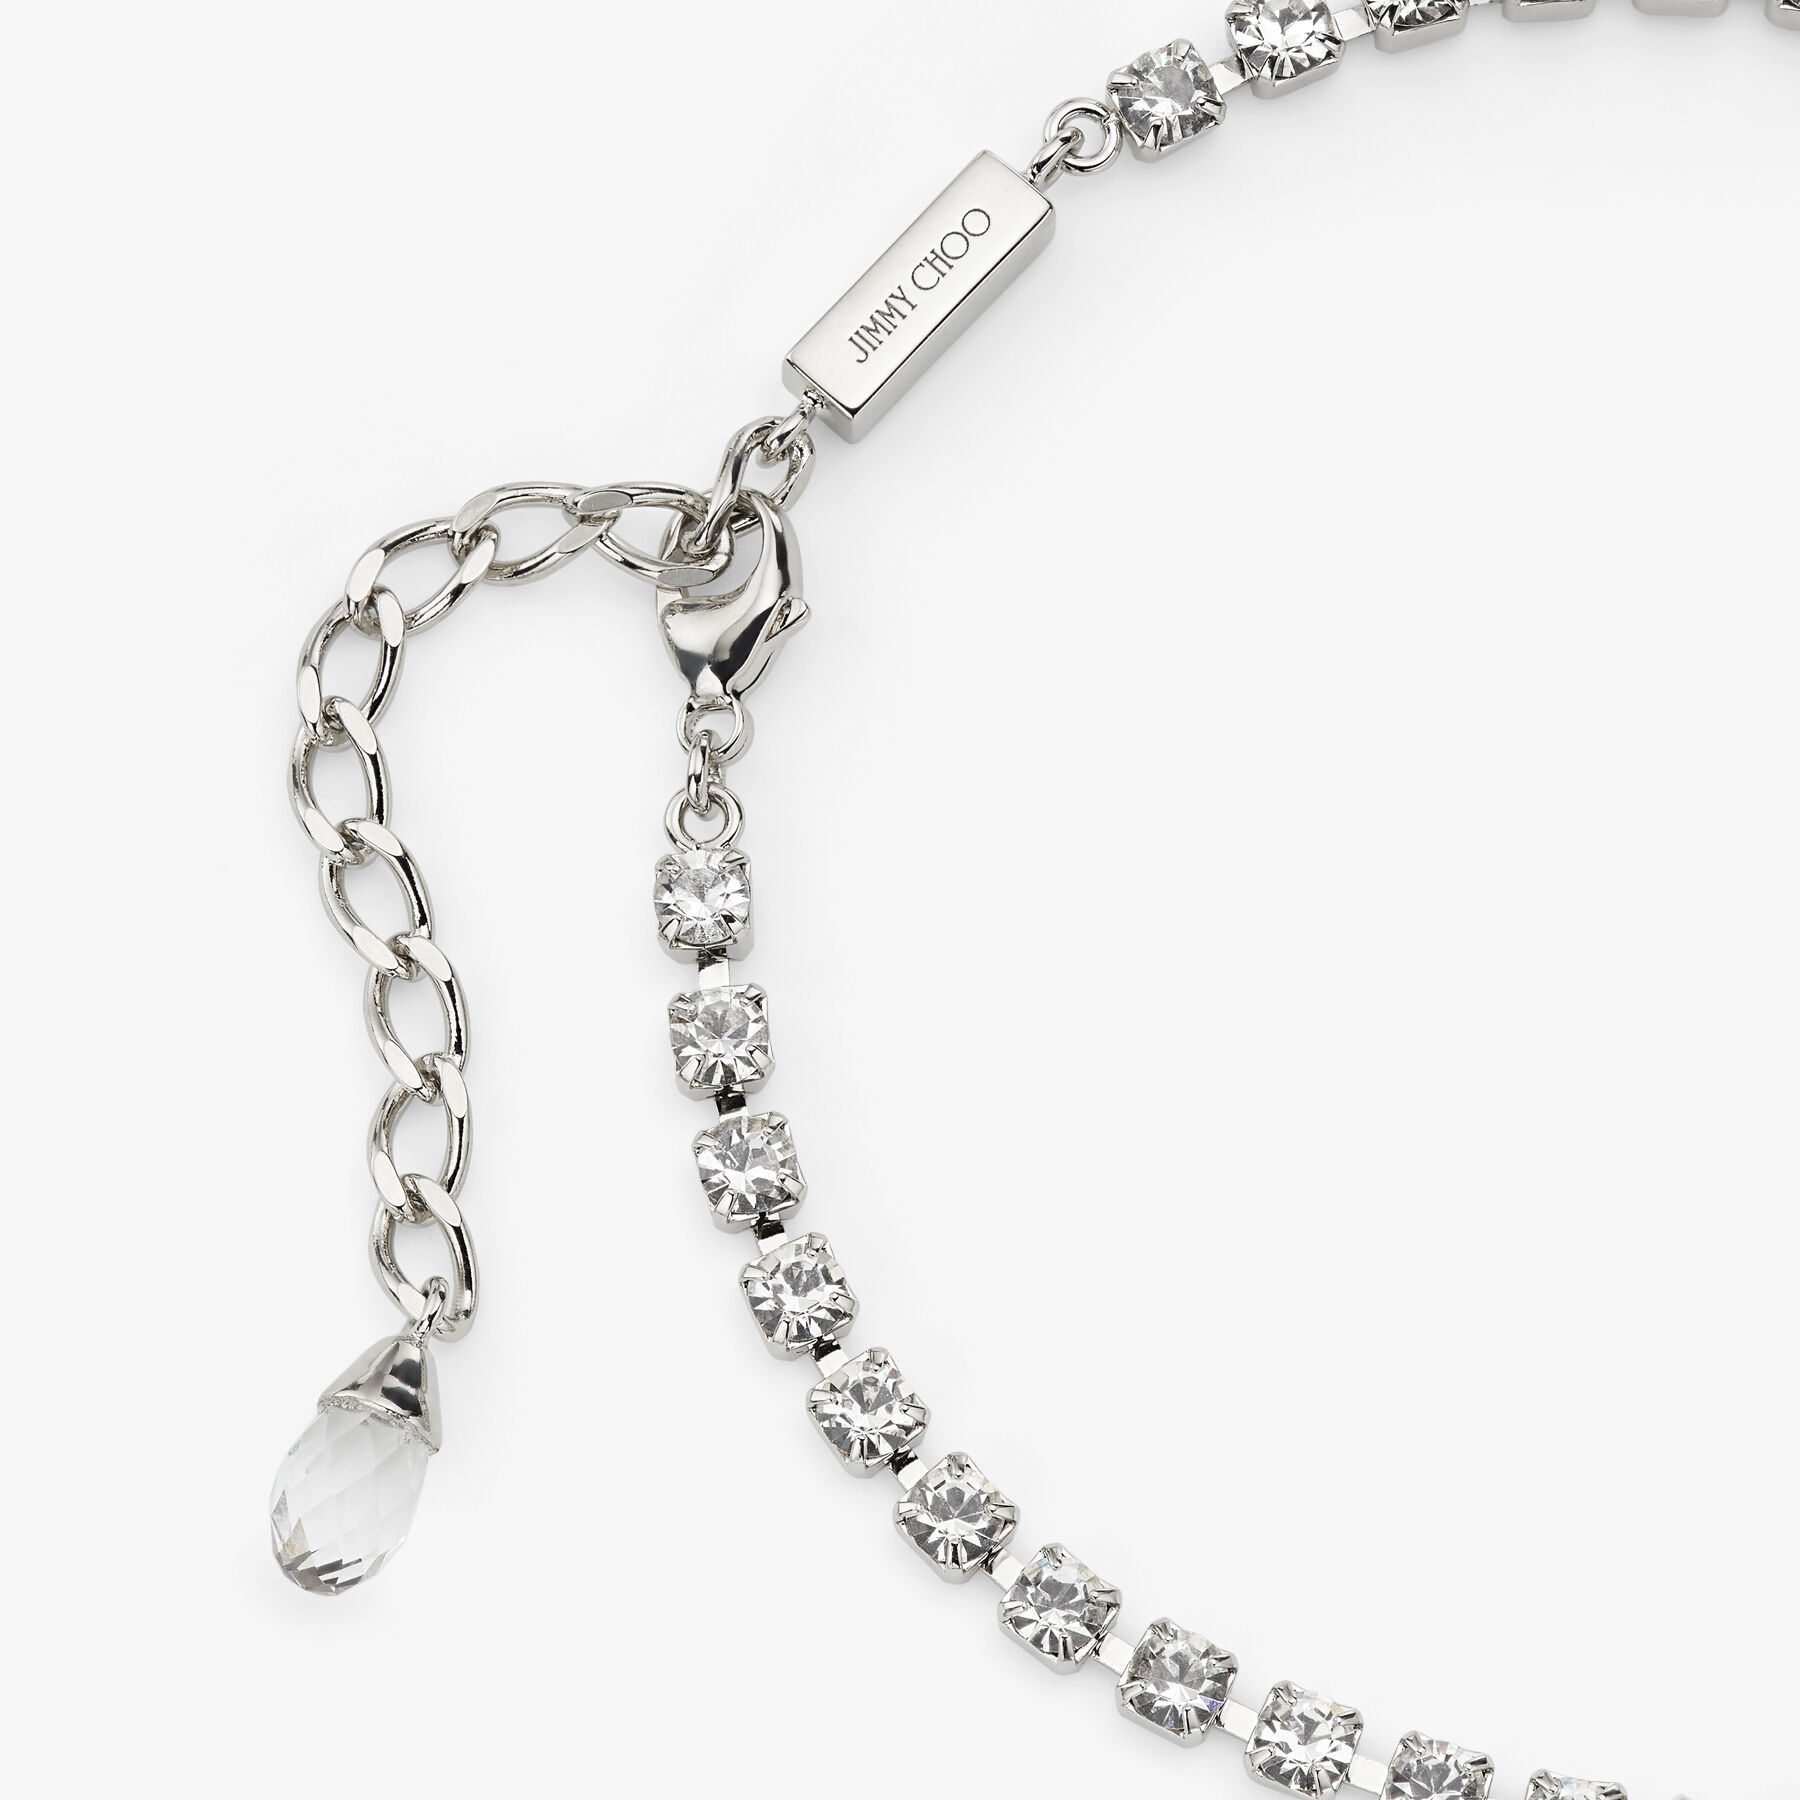 Saeda Anklet | Silver-Finish Metal Anklet with Crystal | JIMMY CHOO